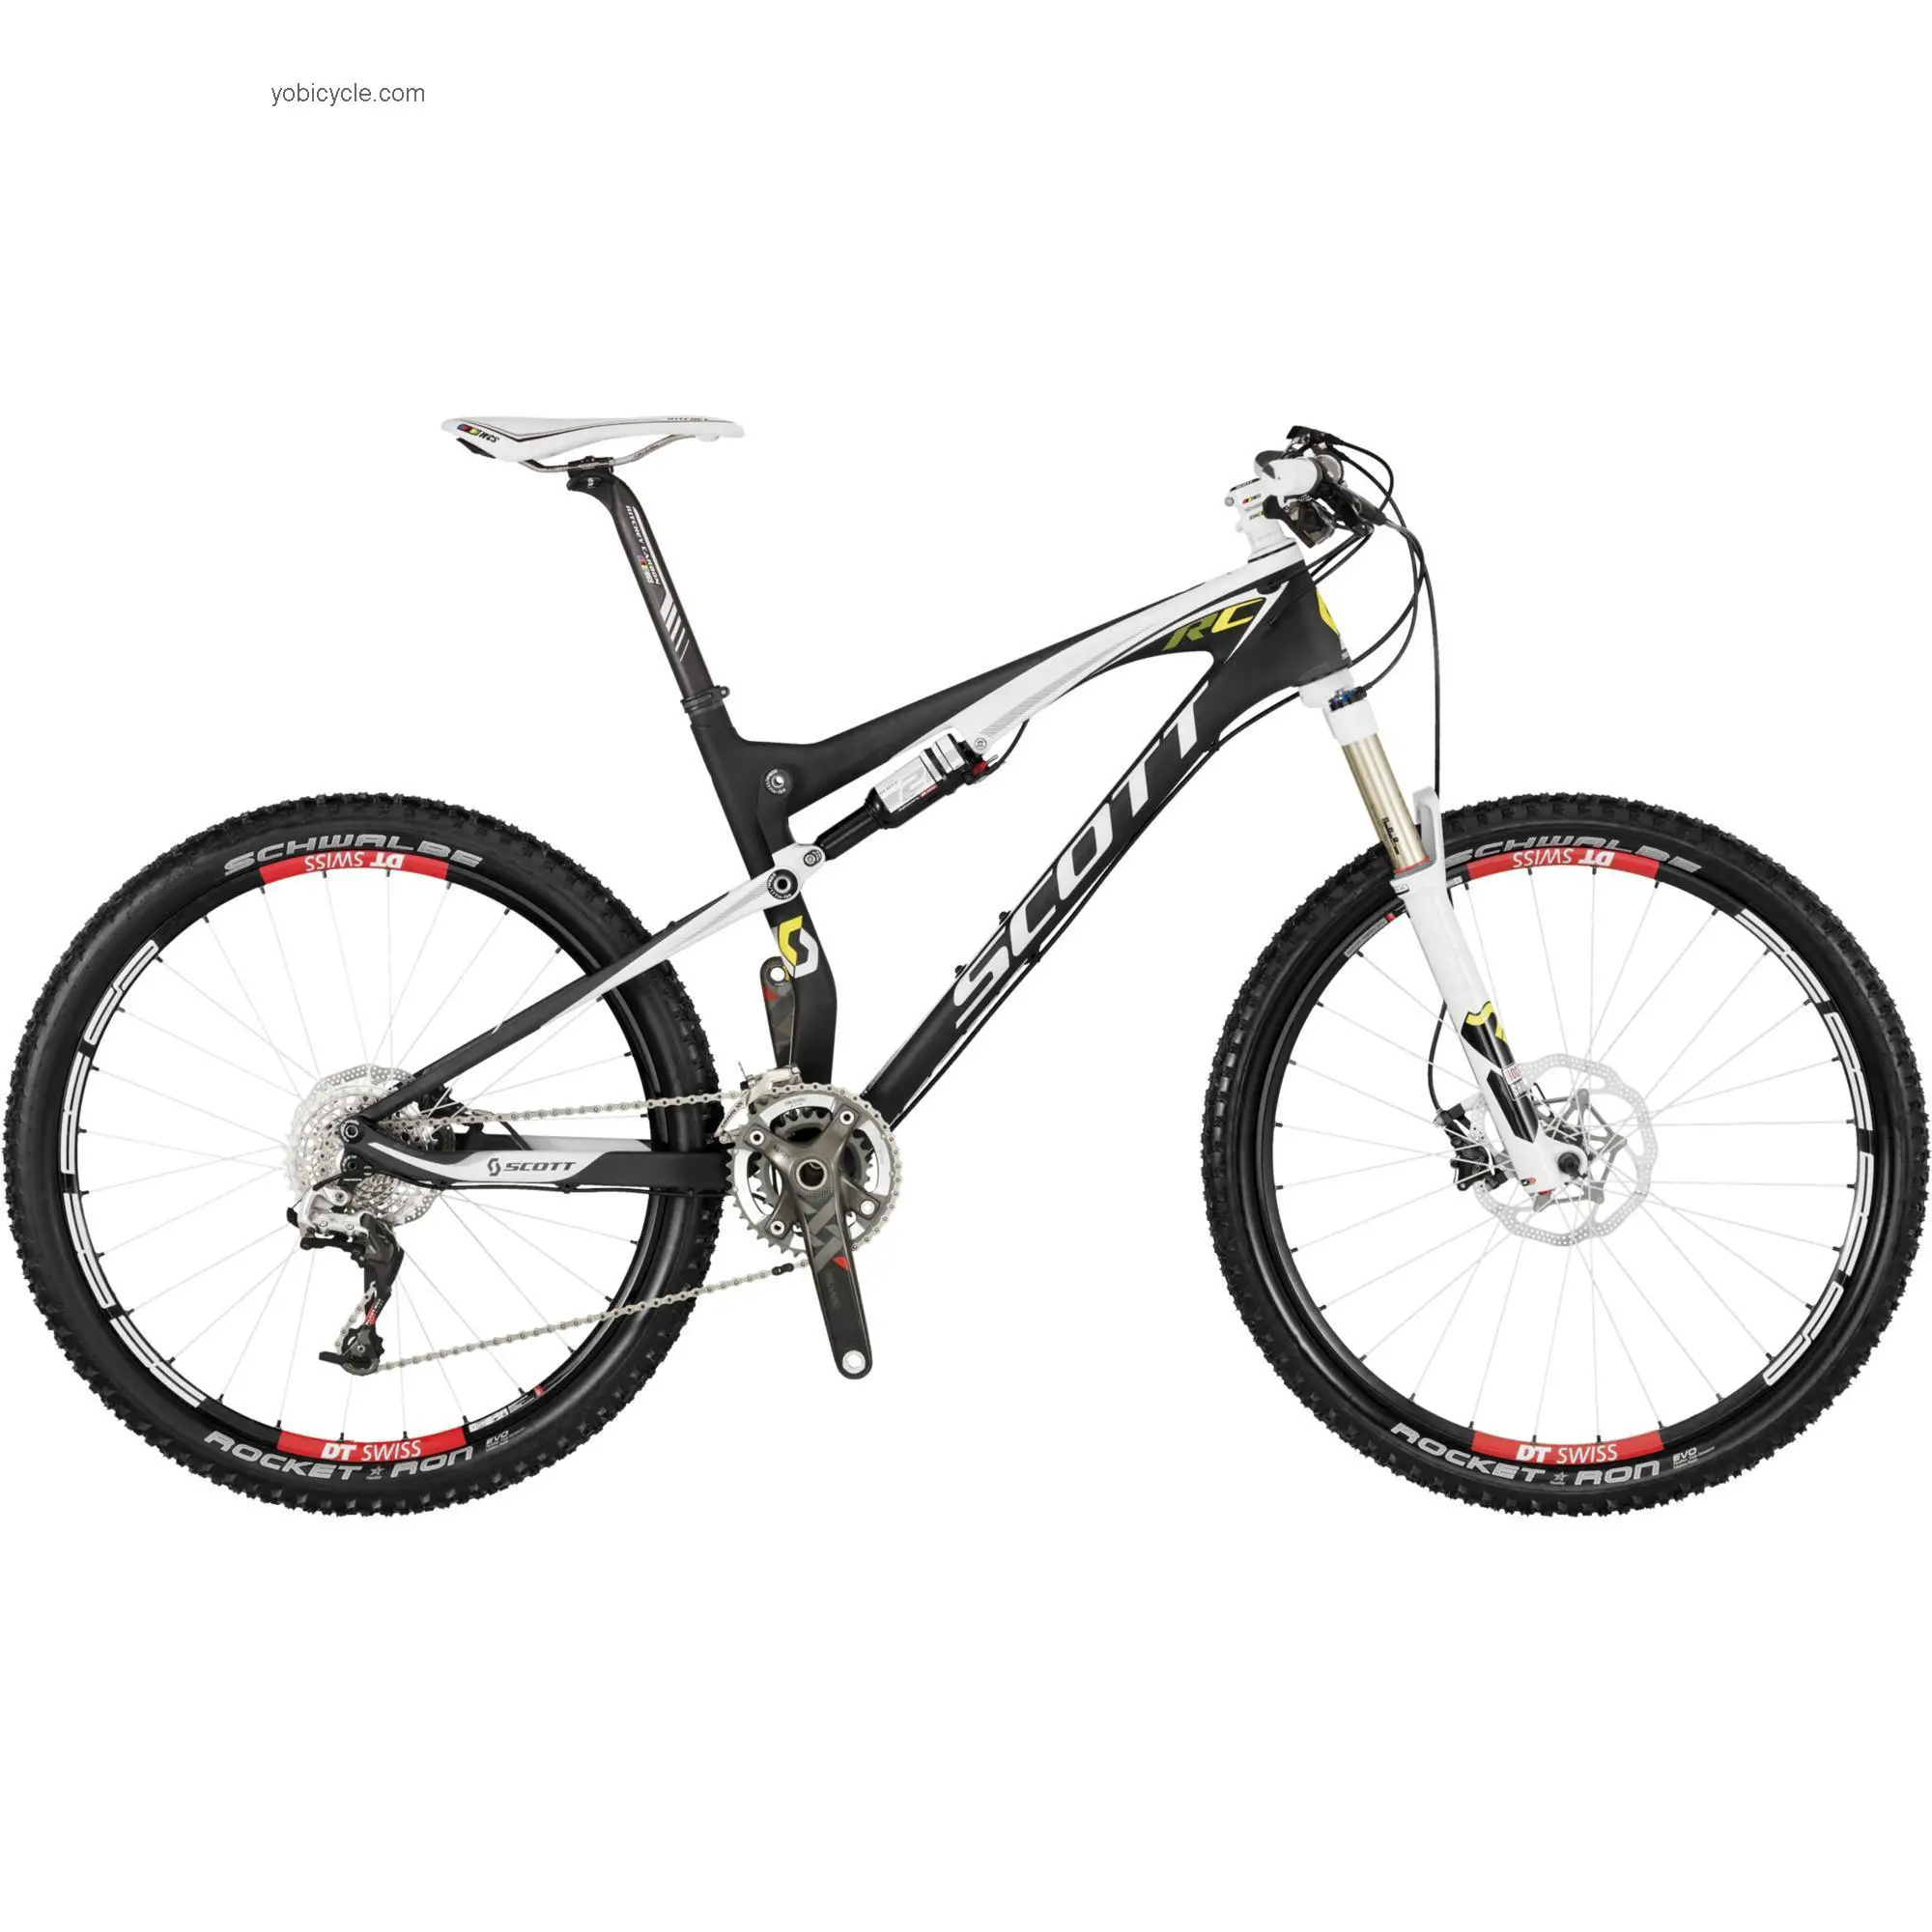 Scott  Spark RC Technical data and specifications